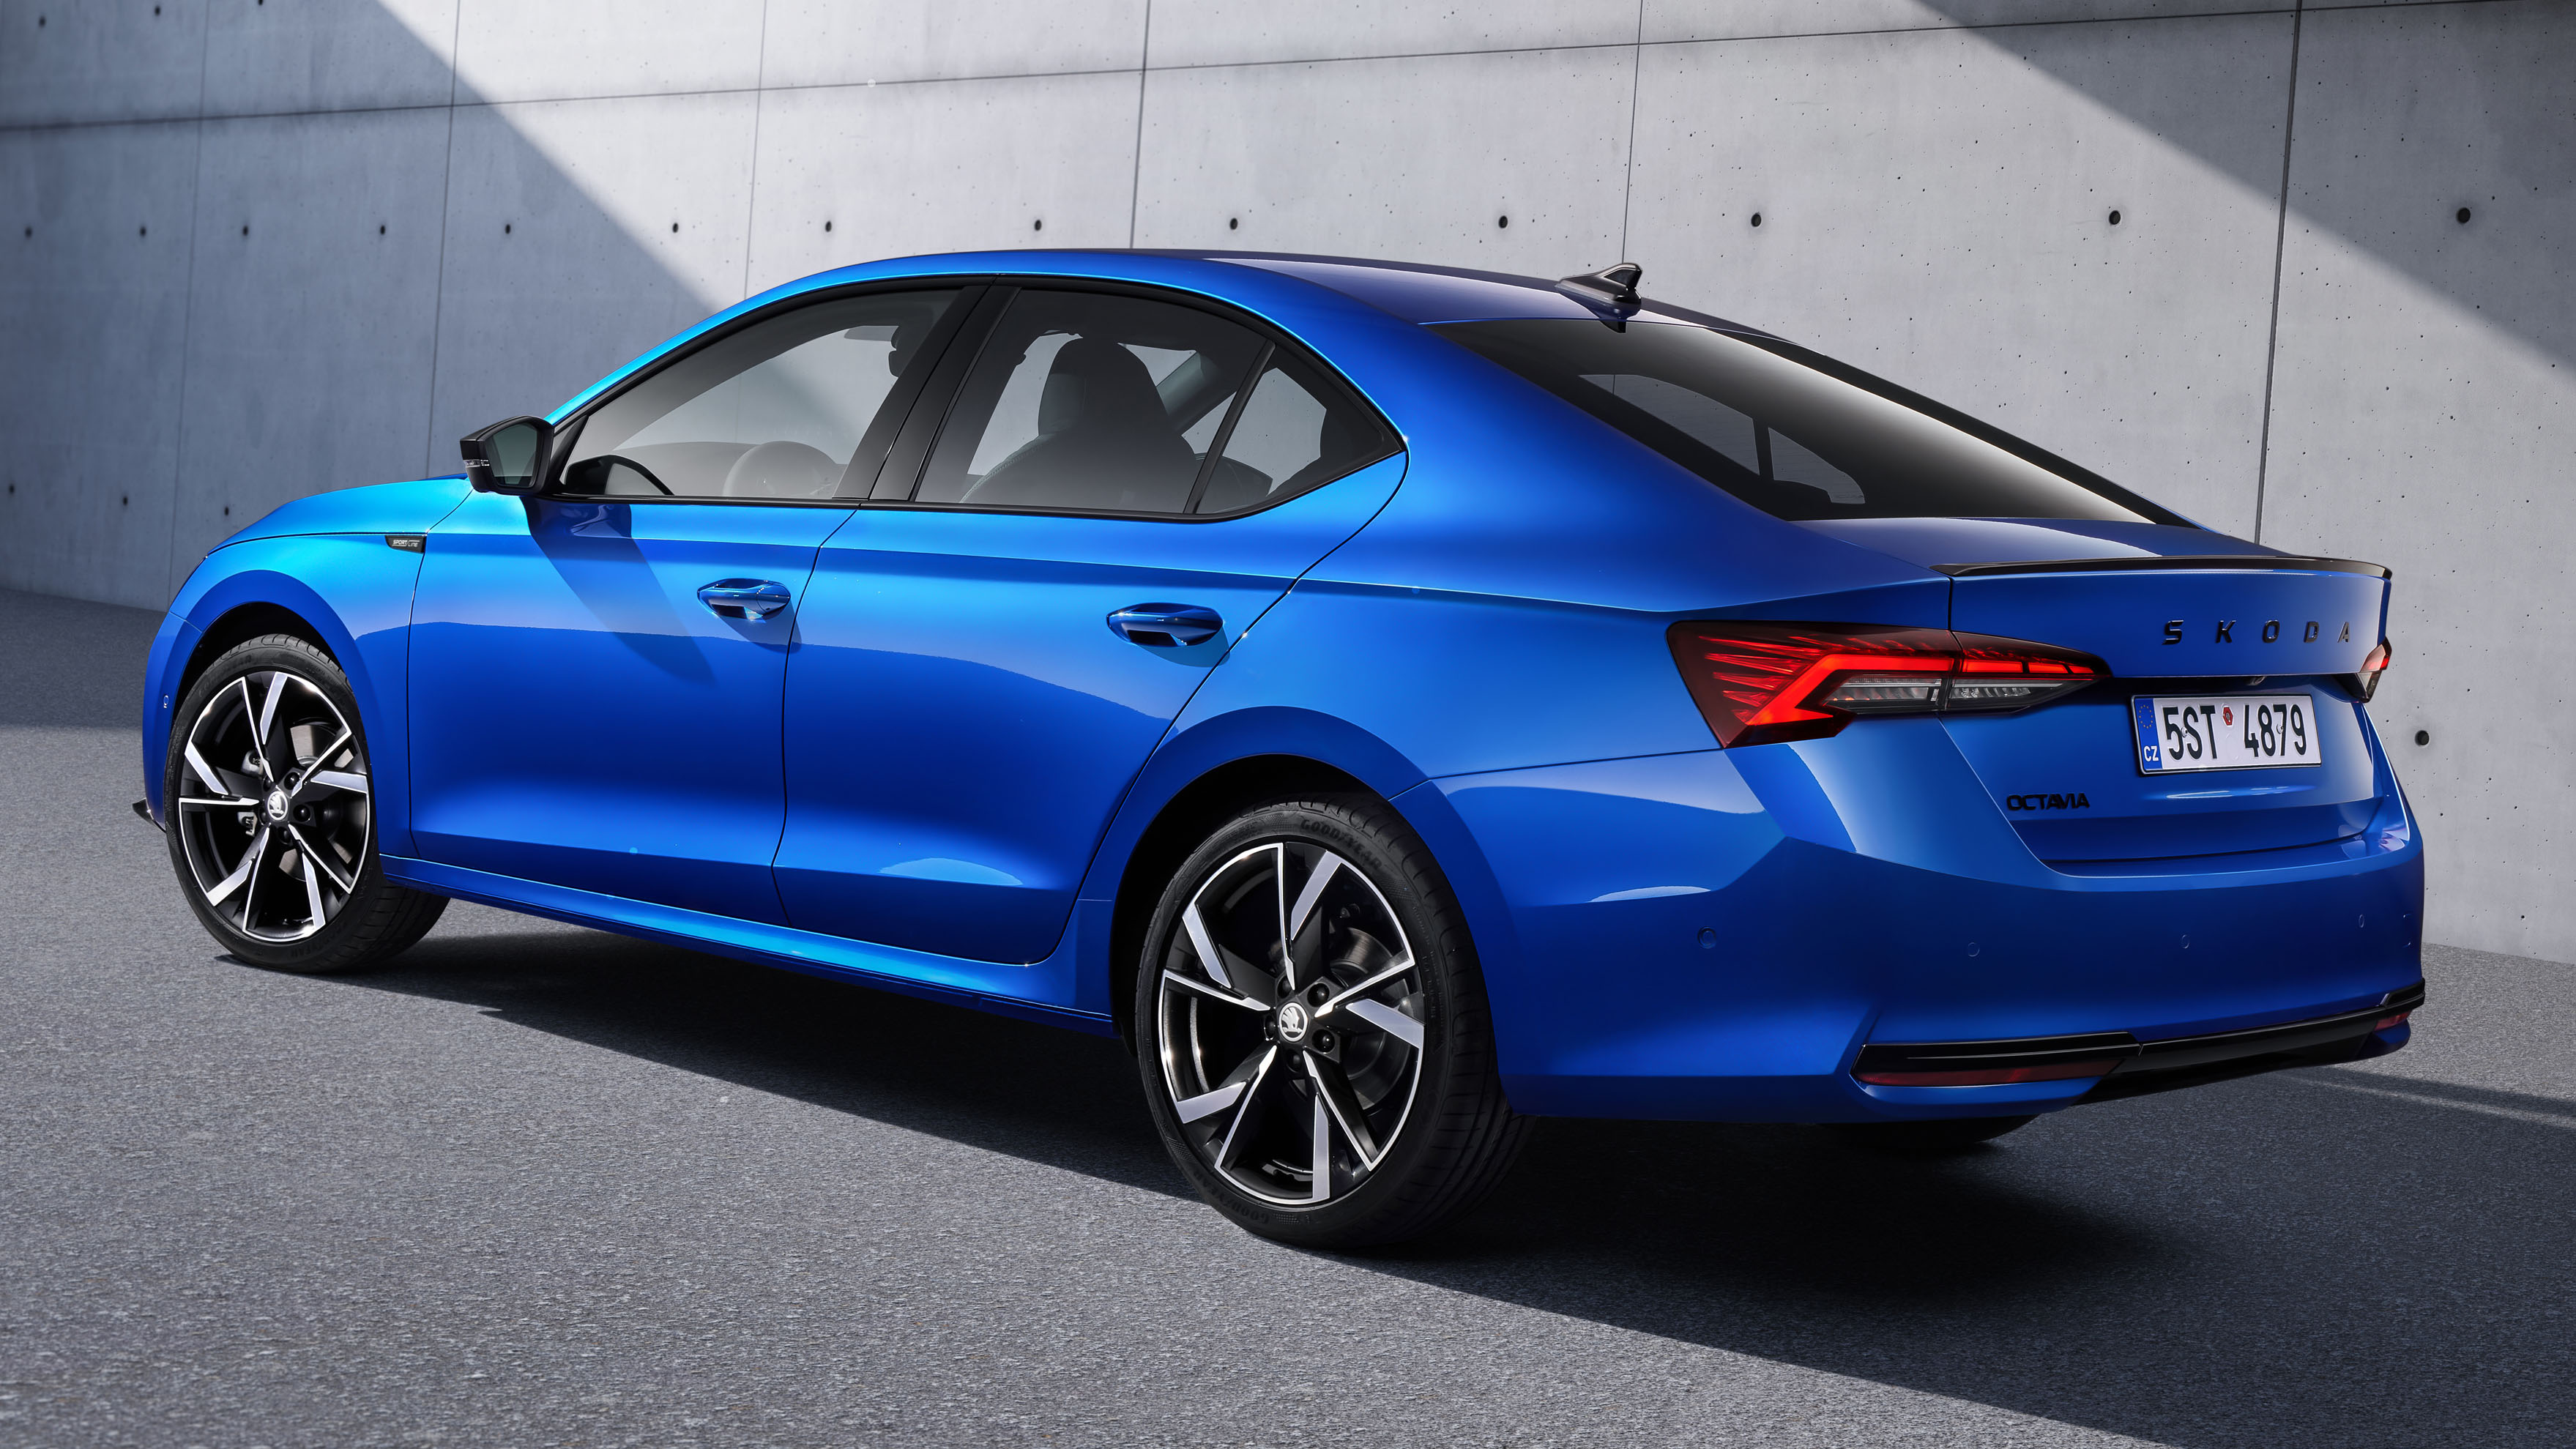 the new skoda octavia vrs is now 20bhp more powerful